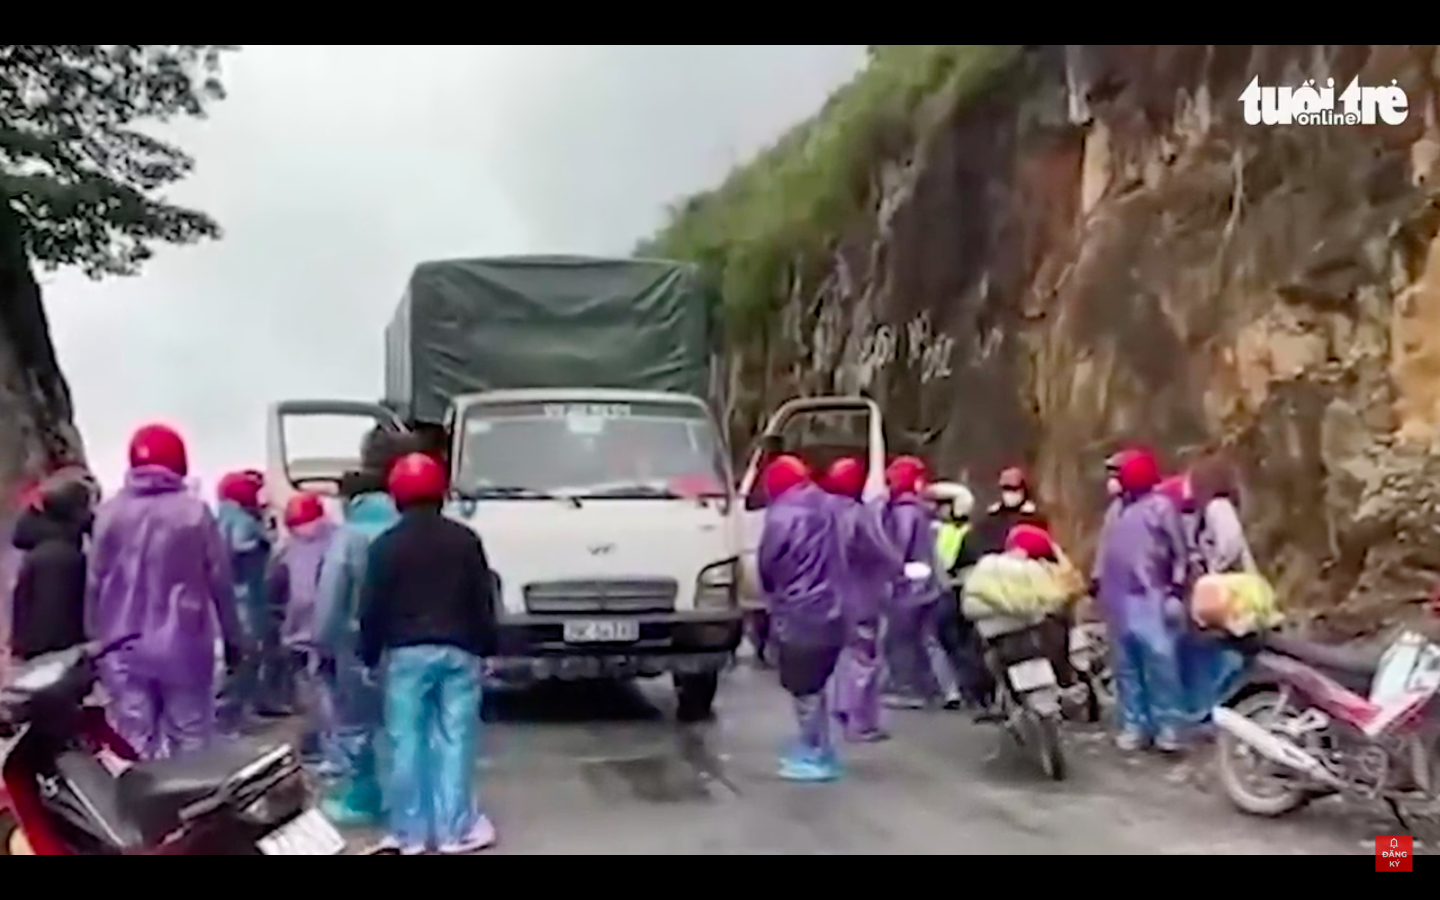 One detained as 20-member backpacking group attack truck driver in northern Vietnam